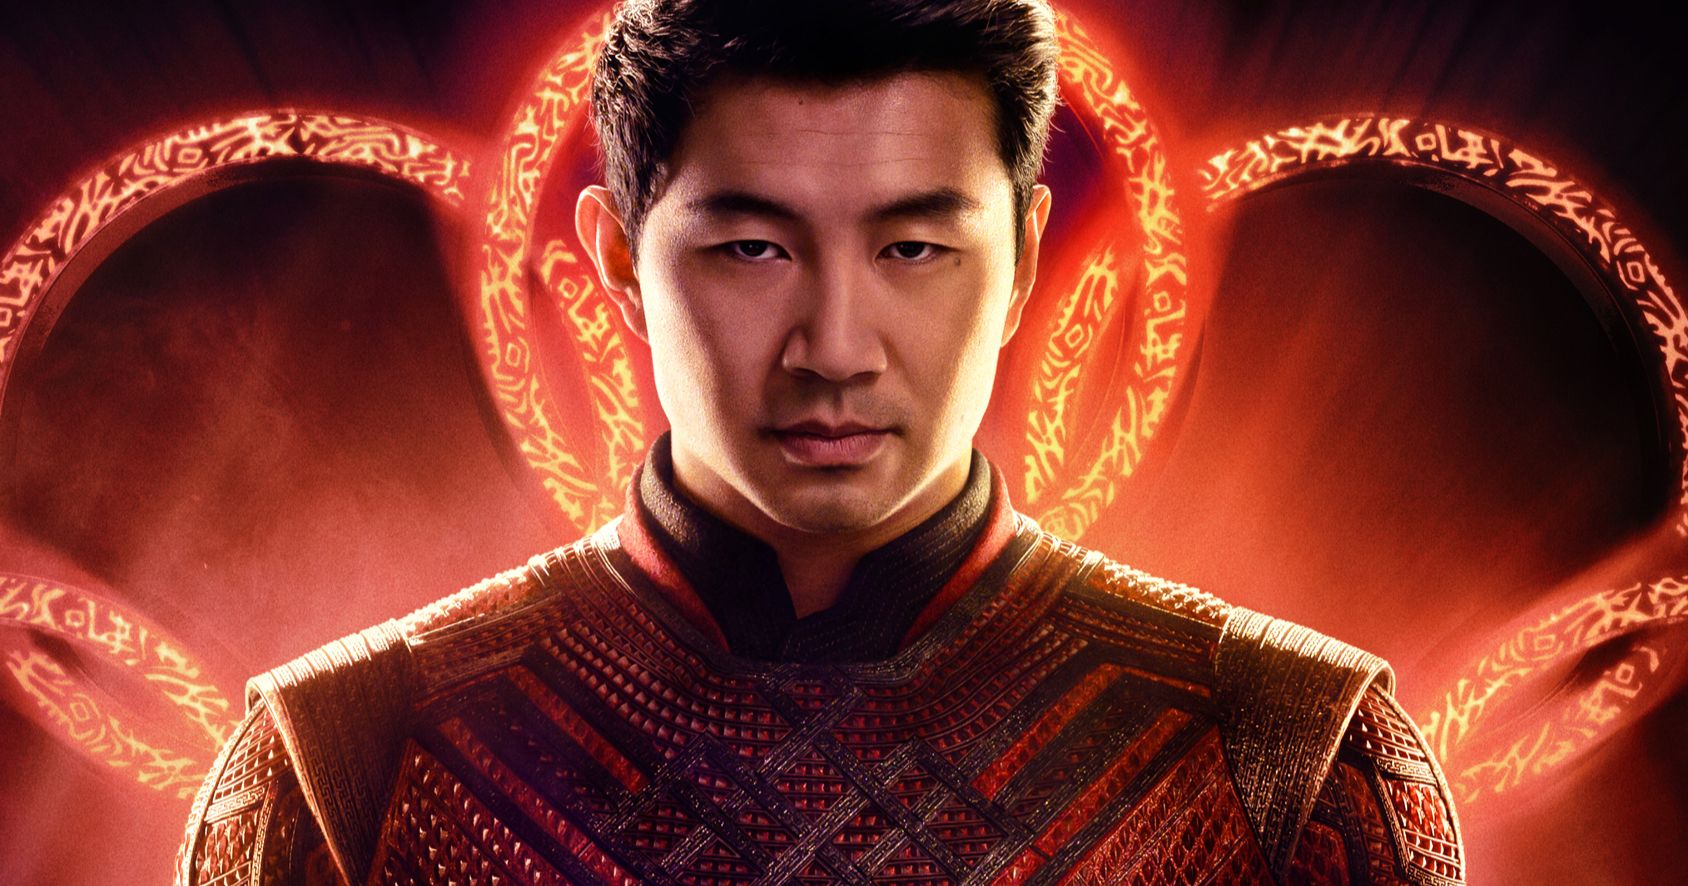 Shang-Chi and the Legend of the Ten Rings Trailer Has Arrived from Marvel